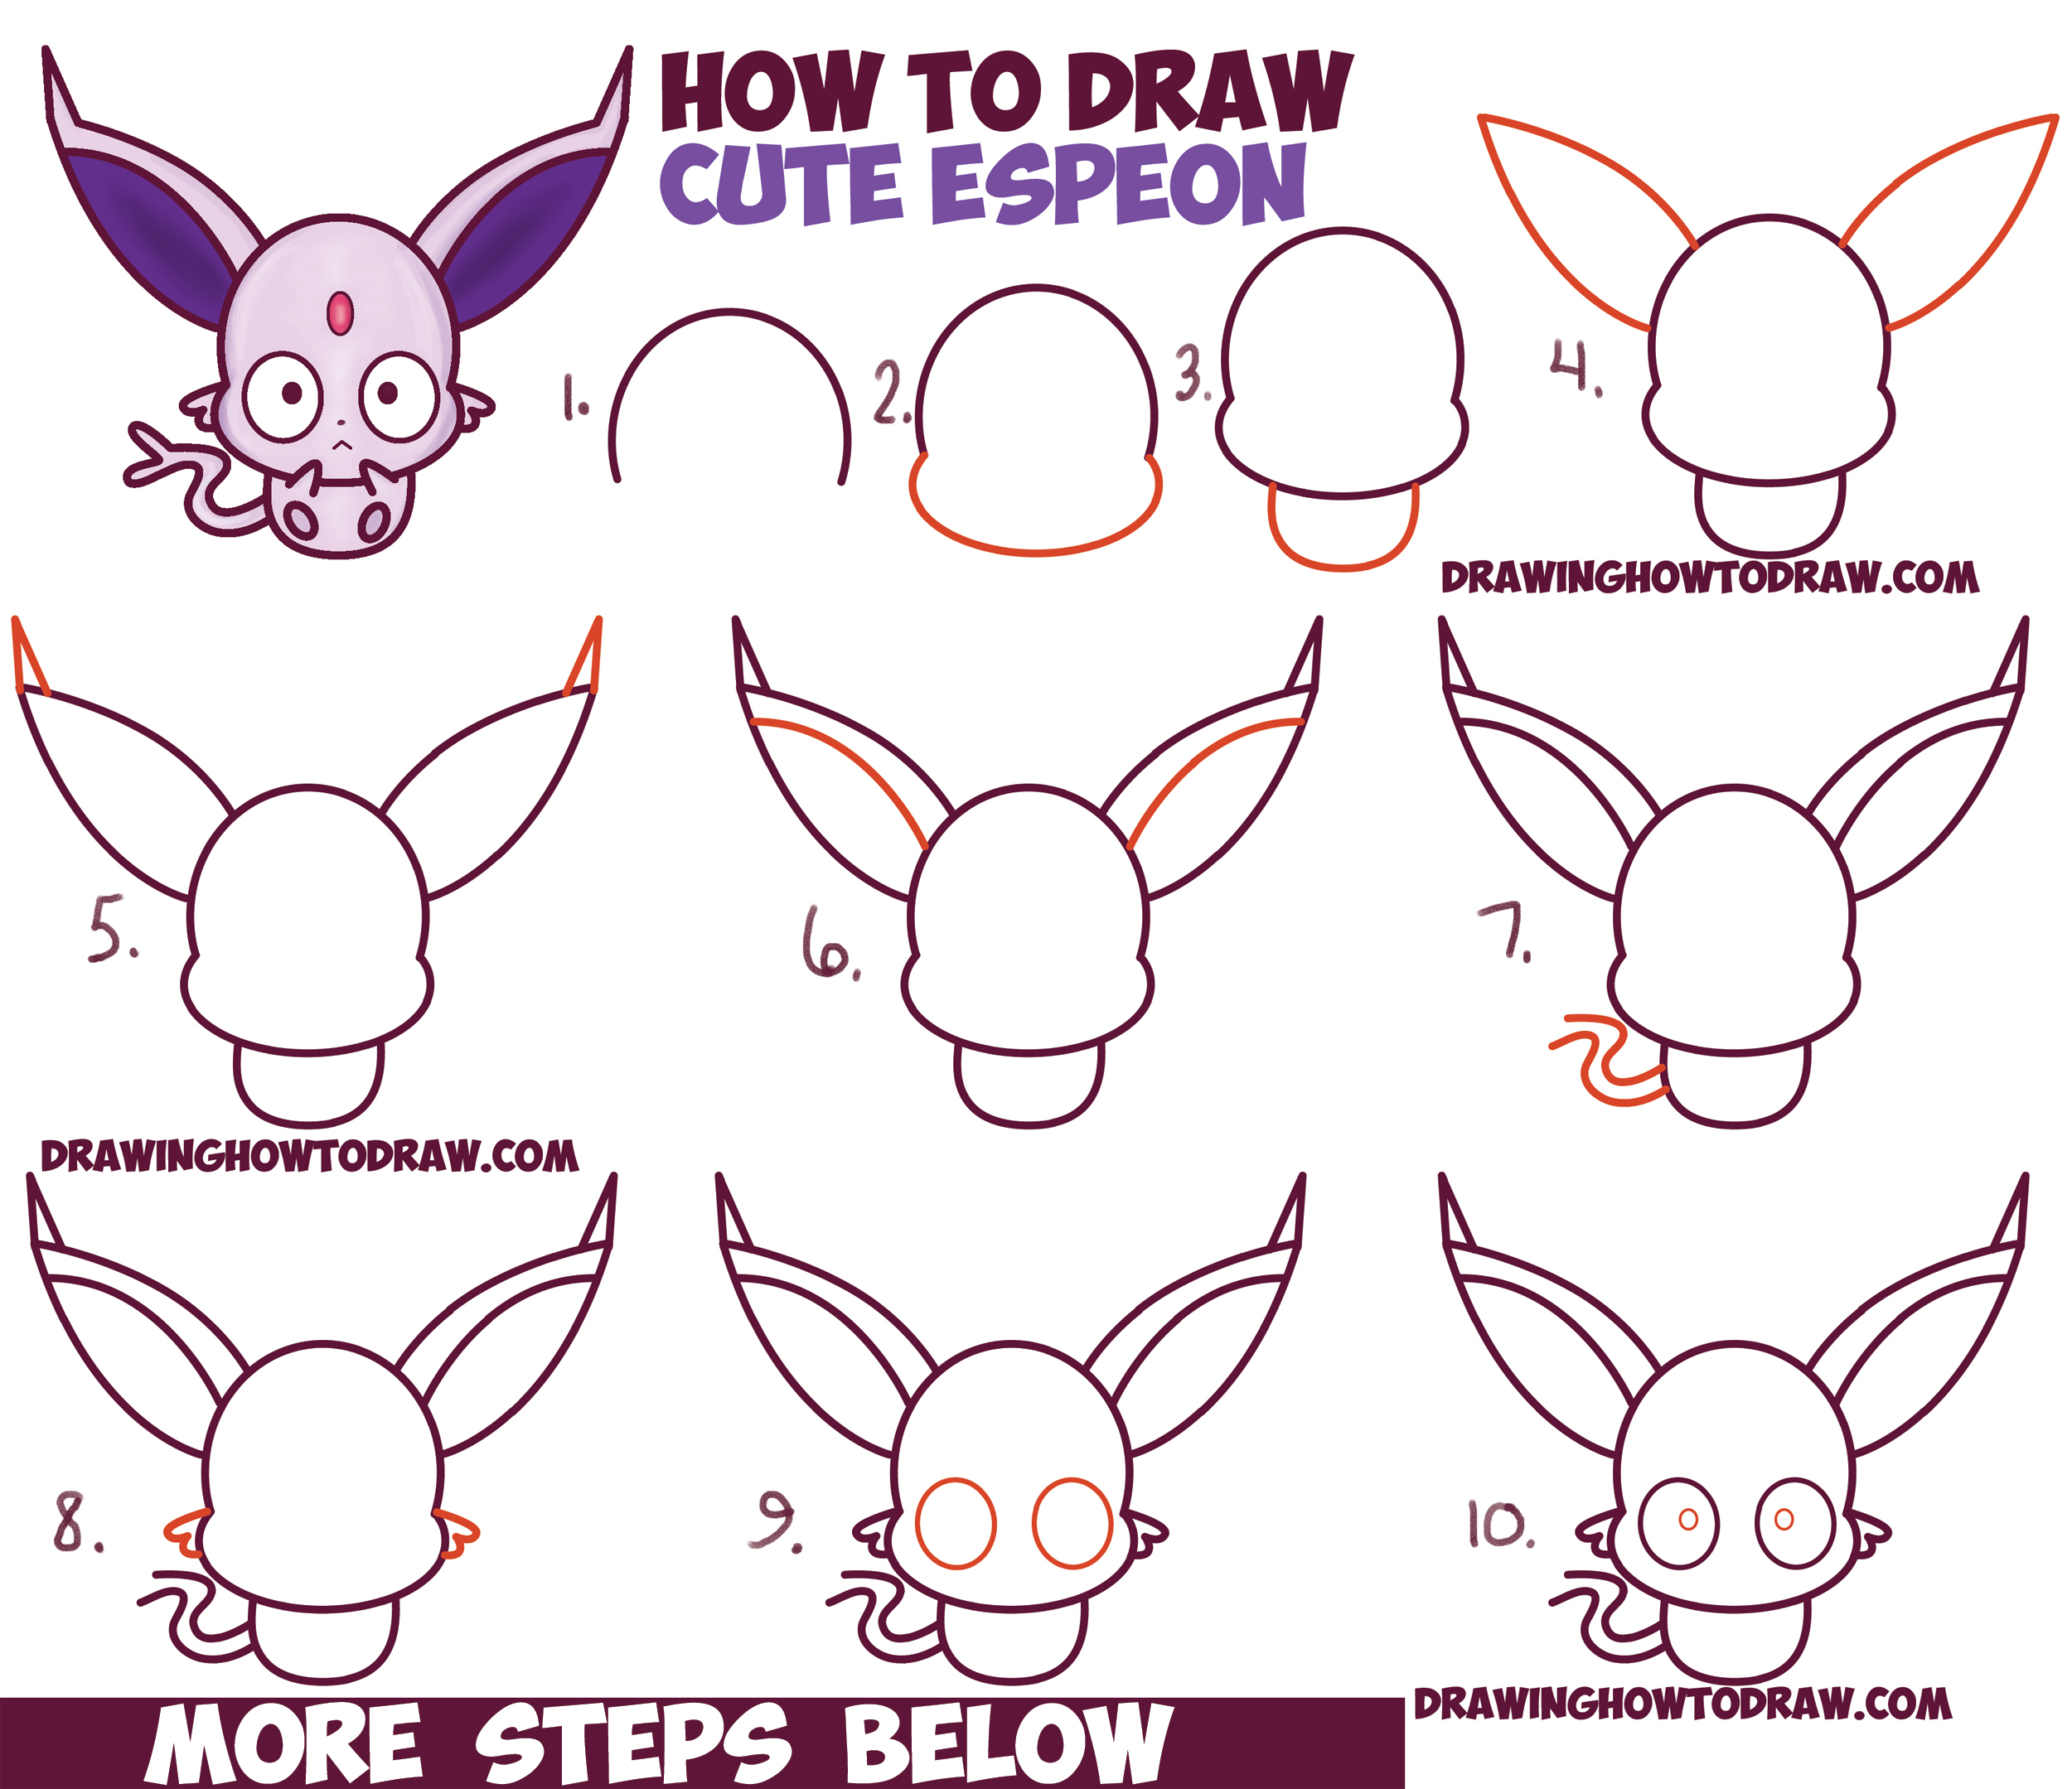 How to Draw Cute Kawaii / Chibi Espeon from Pokemon Easy Step by Step